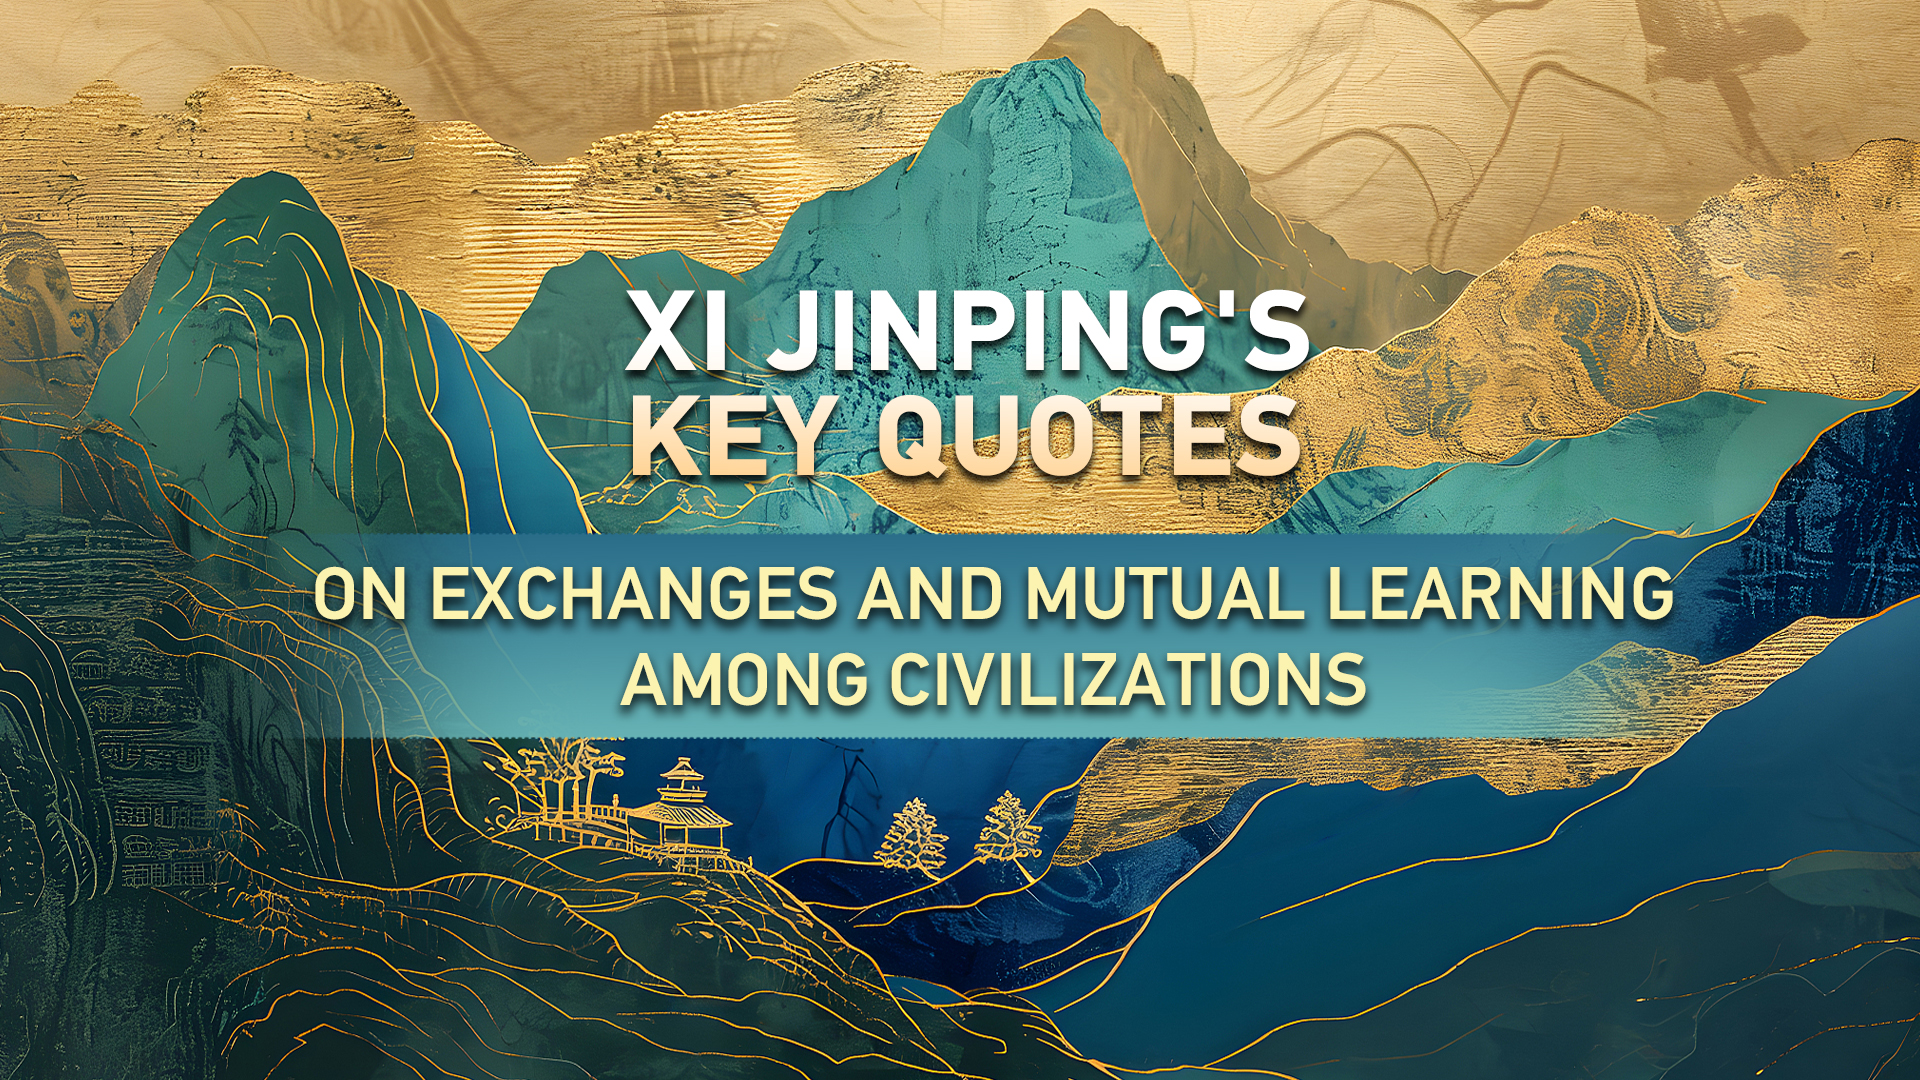 Xi's key quotes on exchanges and mutual learning among civilizations